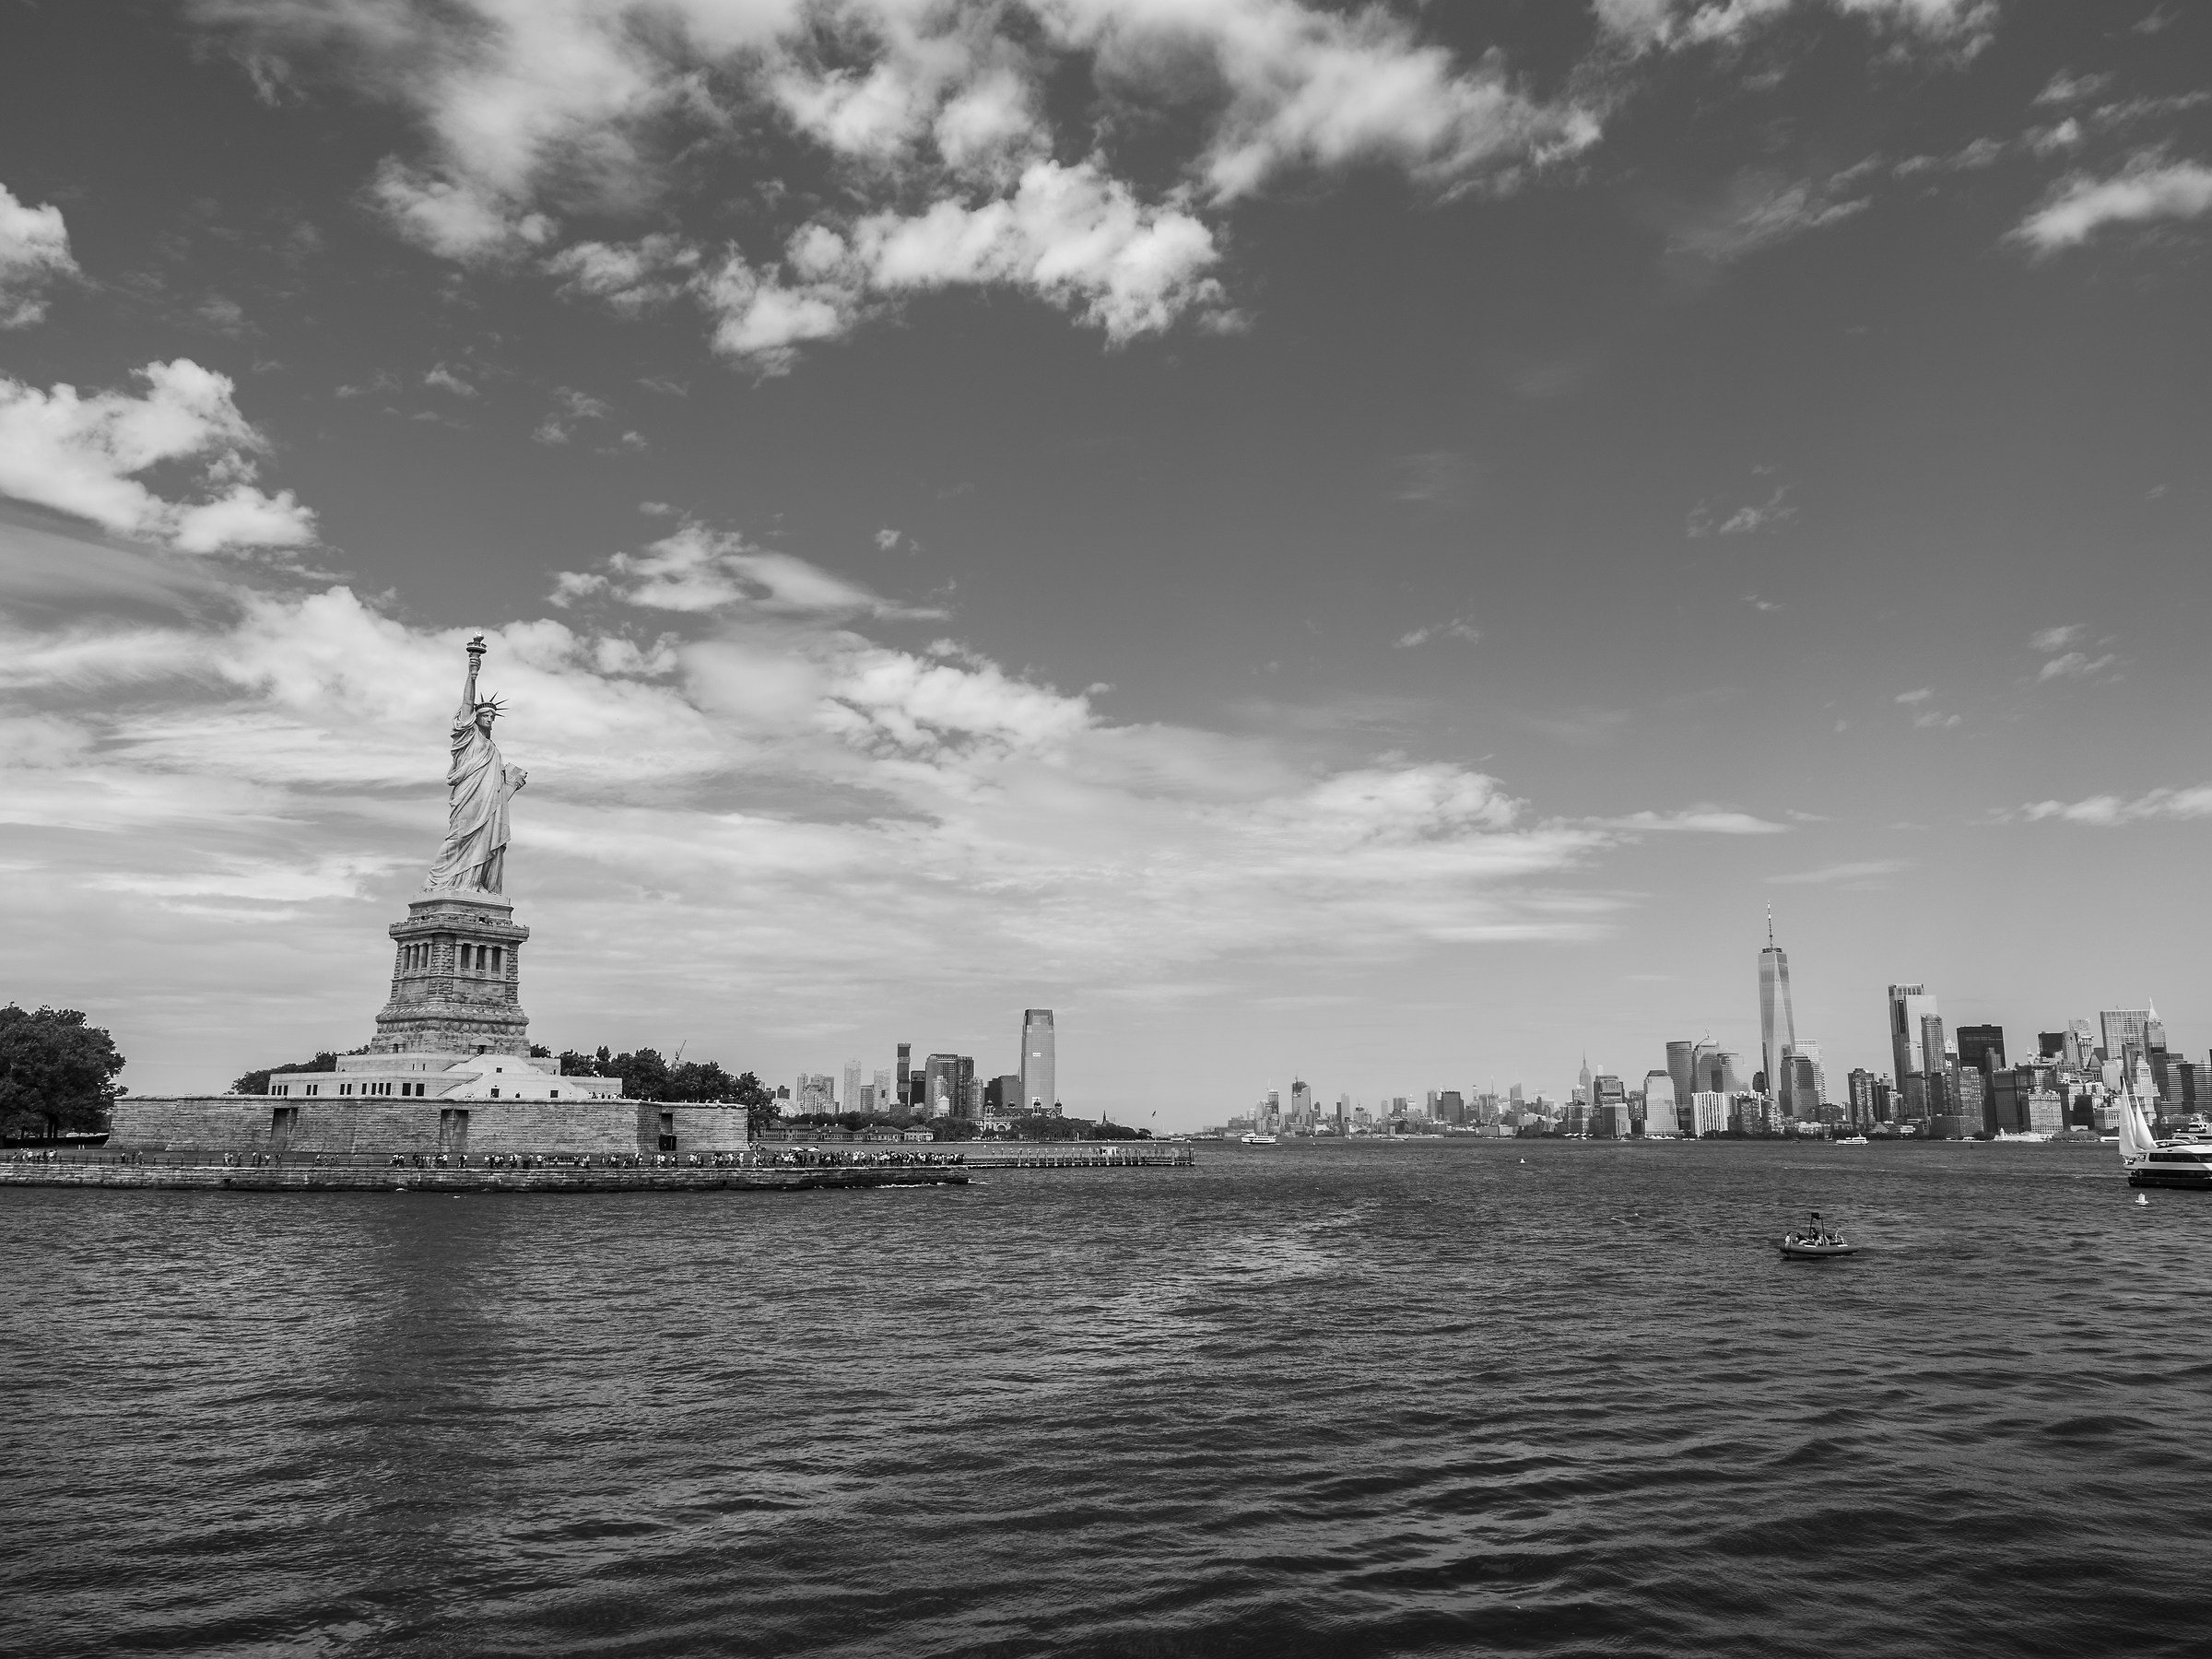 Statue of Liberty by ferry...